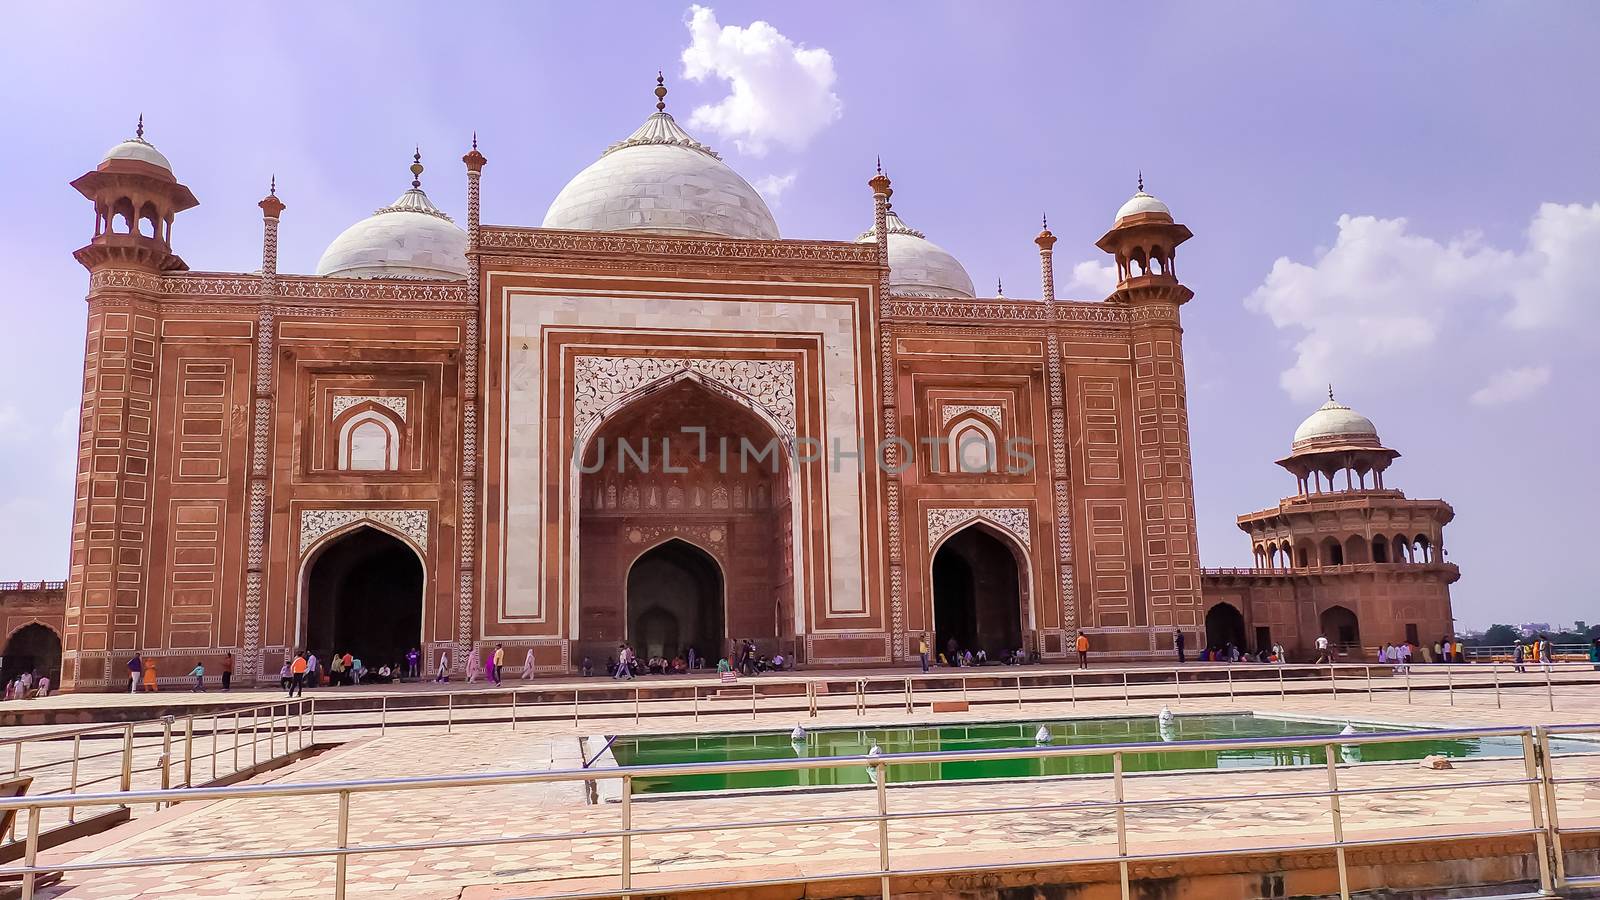 Grand imperial sandstone Persian style domed mausoleum Humayun Tomb in the landscaped char-bagh garden. A finest example of Mughal architecture and iconic structures. New Delhi India May 2019